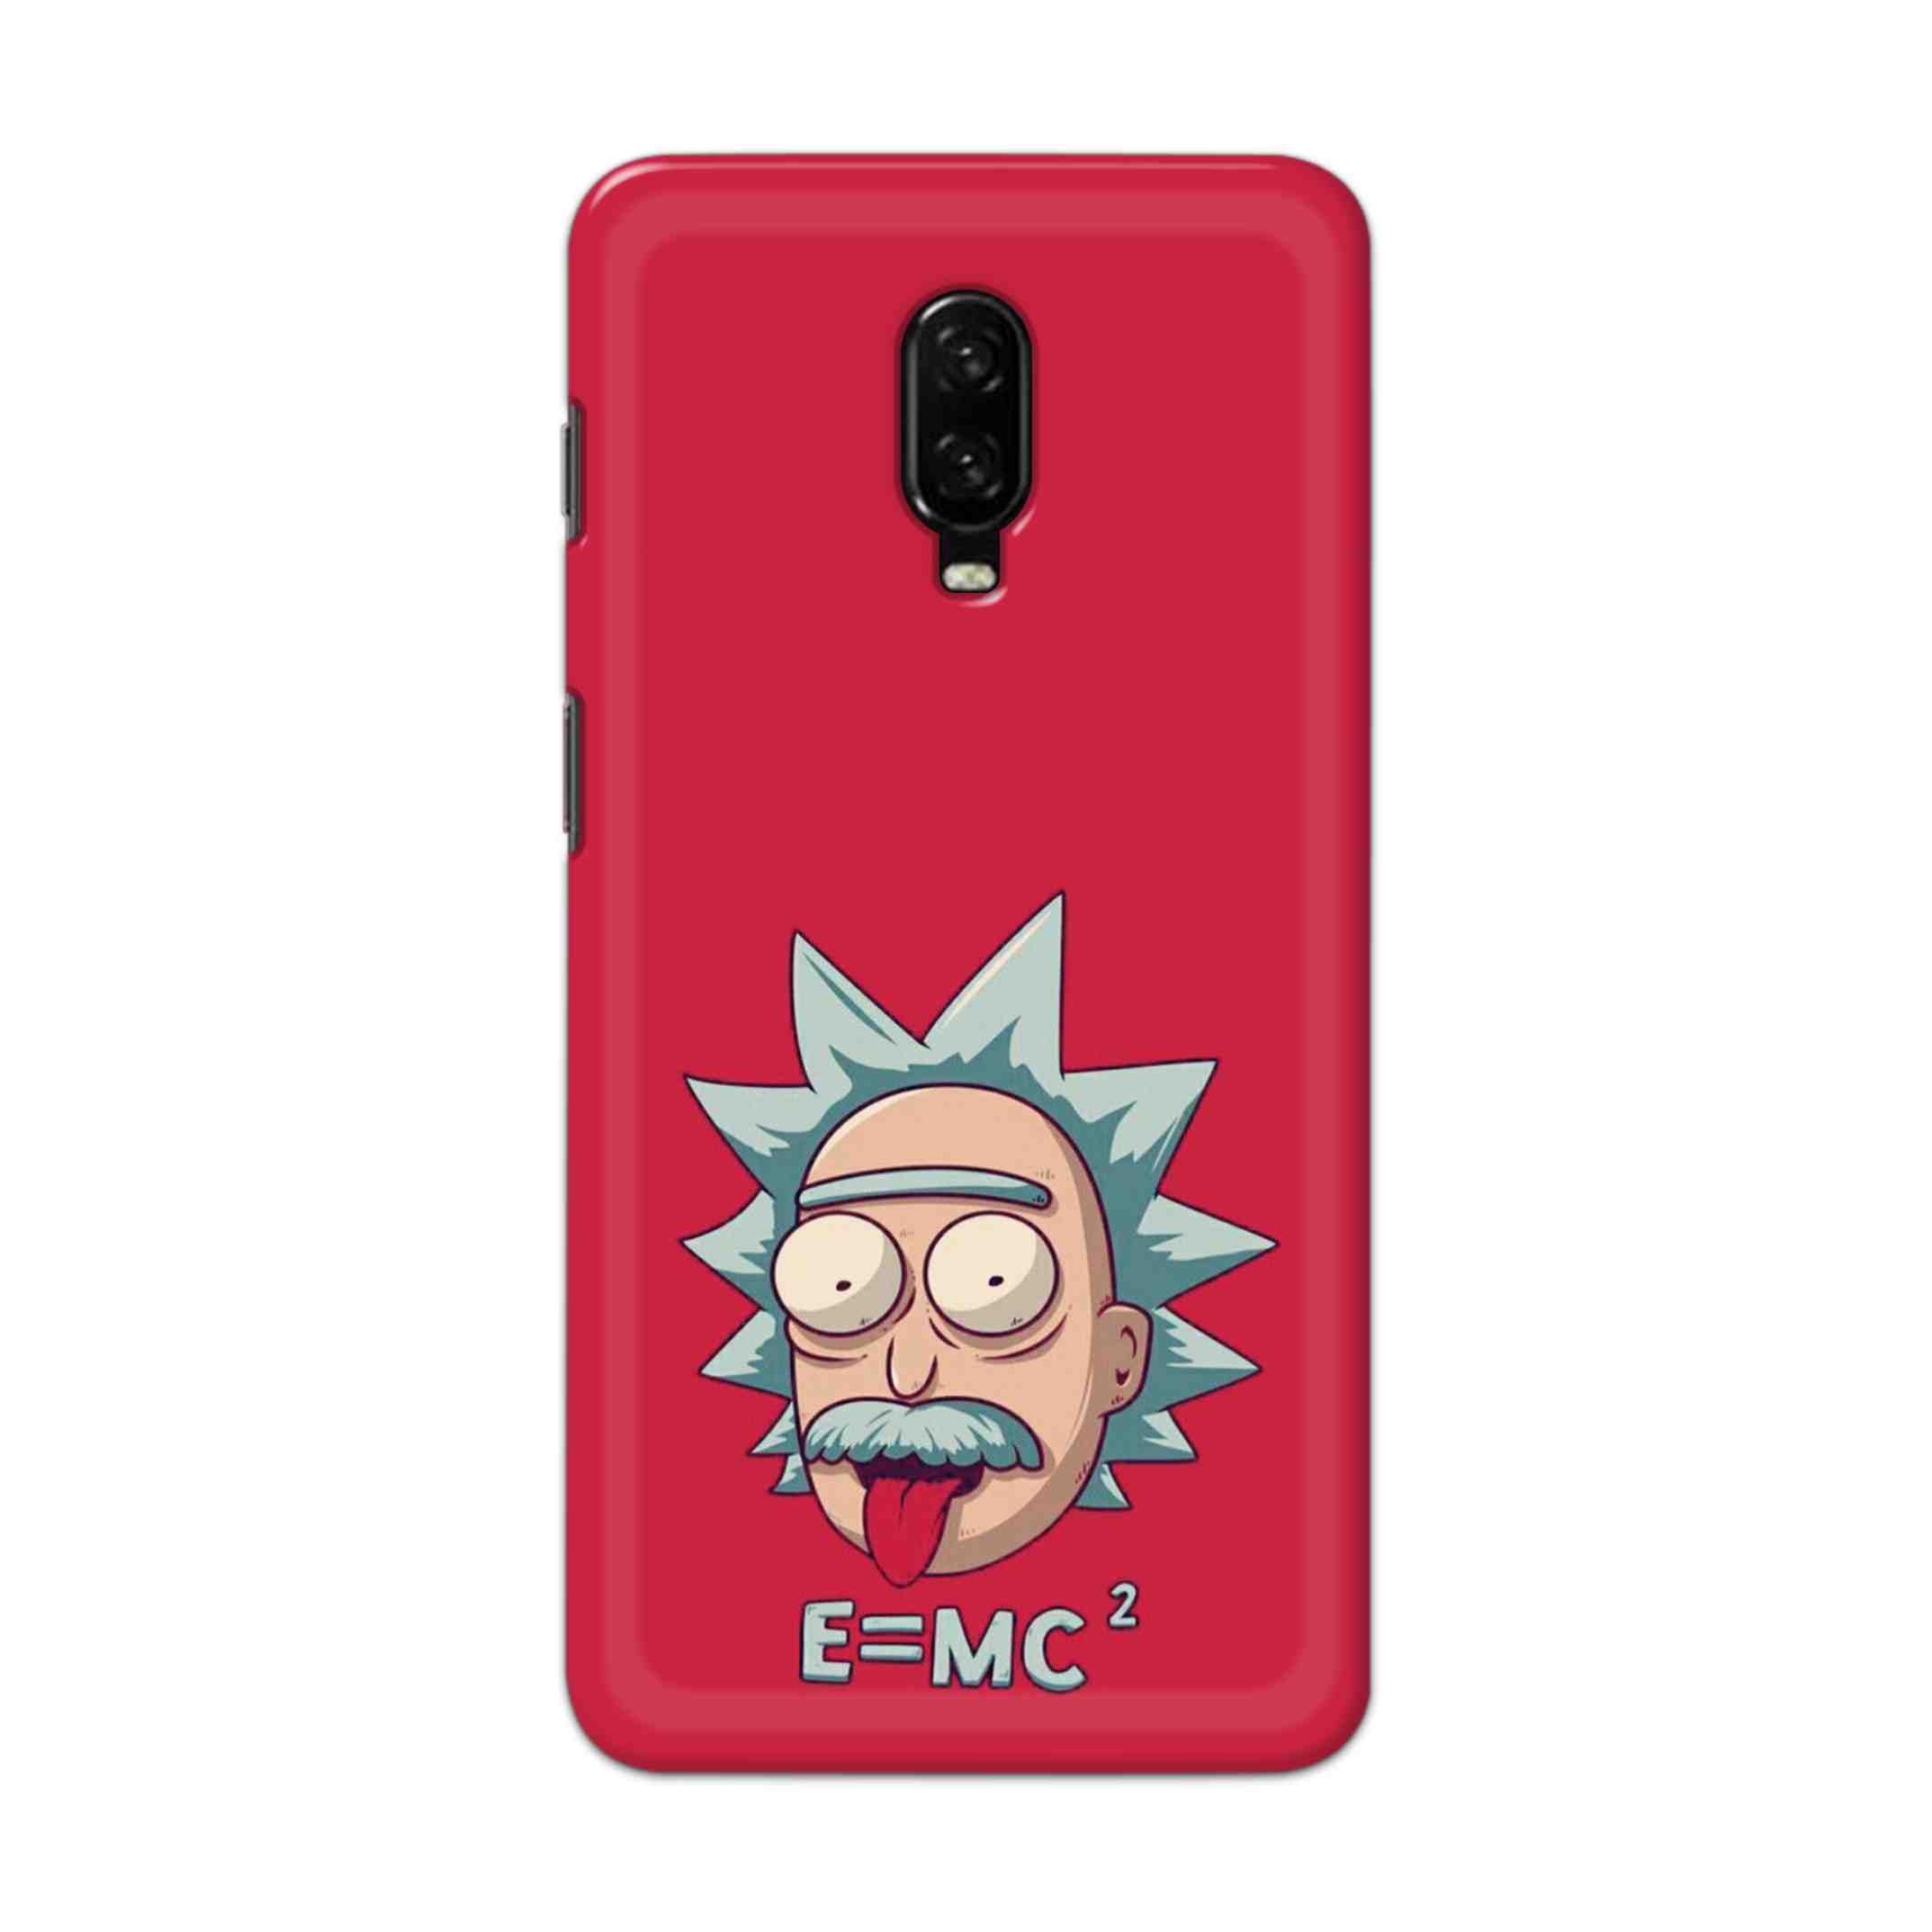 Buy E=Mc Hard Back Mobile Phone Case Cover For OnePlus 6T Online